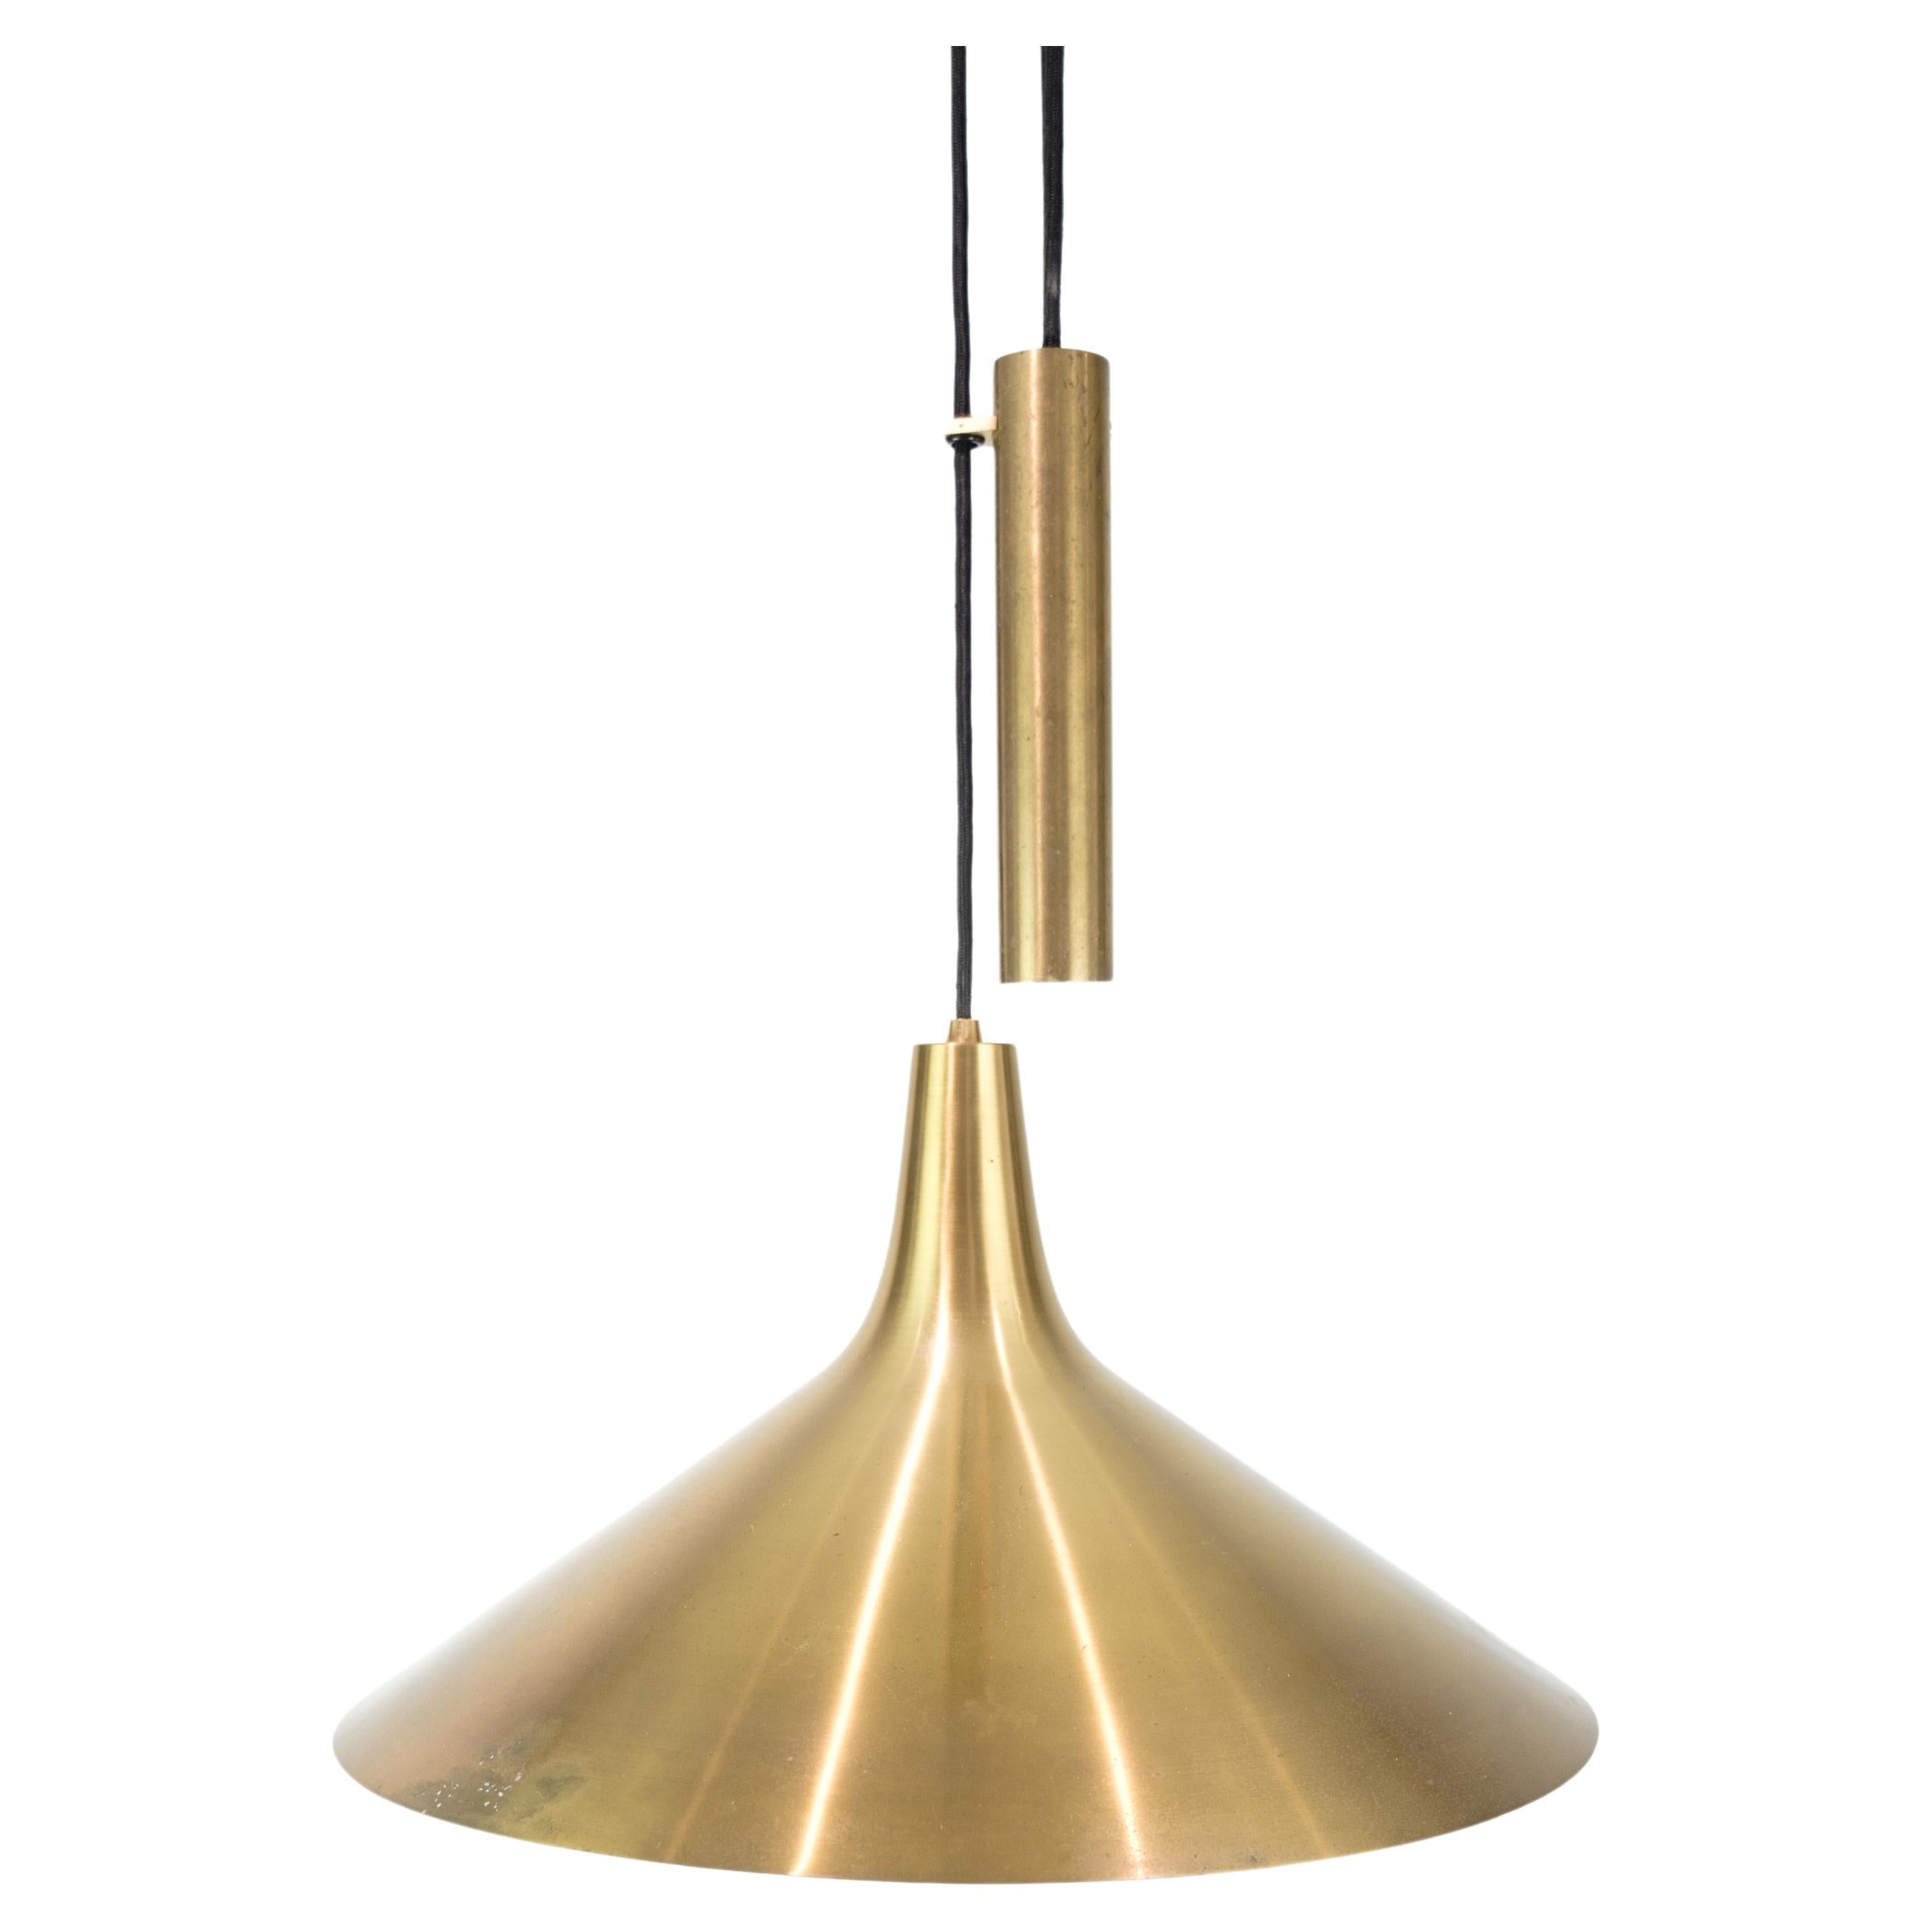 Ceiling lamp In Brass With a Counterweight Pendant, Made by Lyfa From 1960s